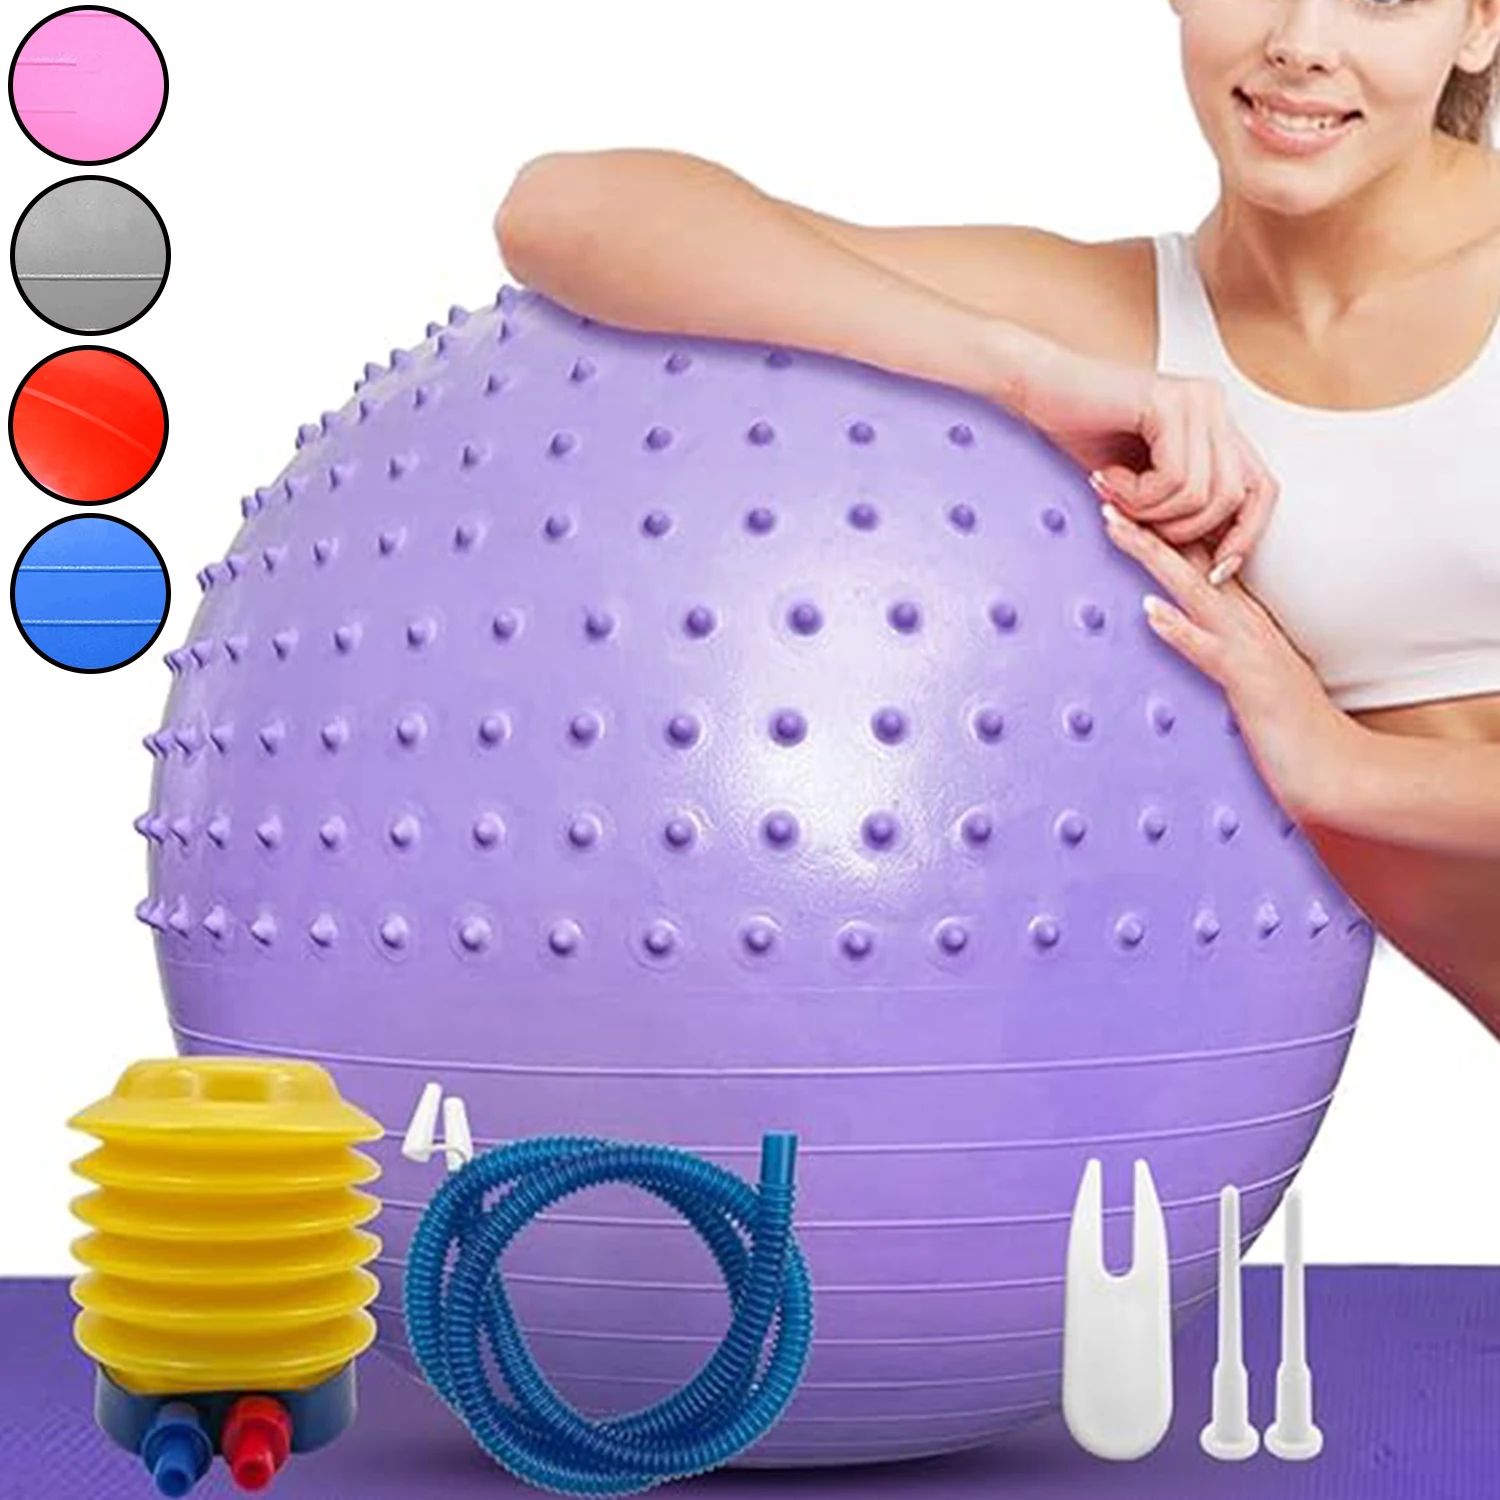 

Yoga Balls,Anti-Burst ,With Massage Point,Sport Pilates Stability Exercise Balance Balls for Fitness,Home Workout,Gym,Pregnancy